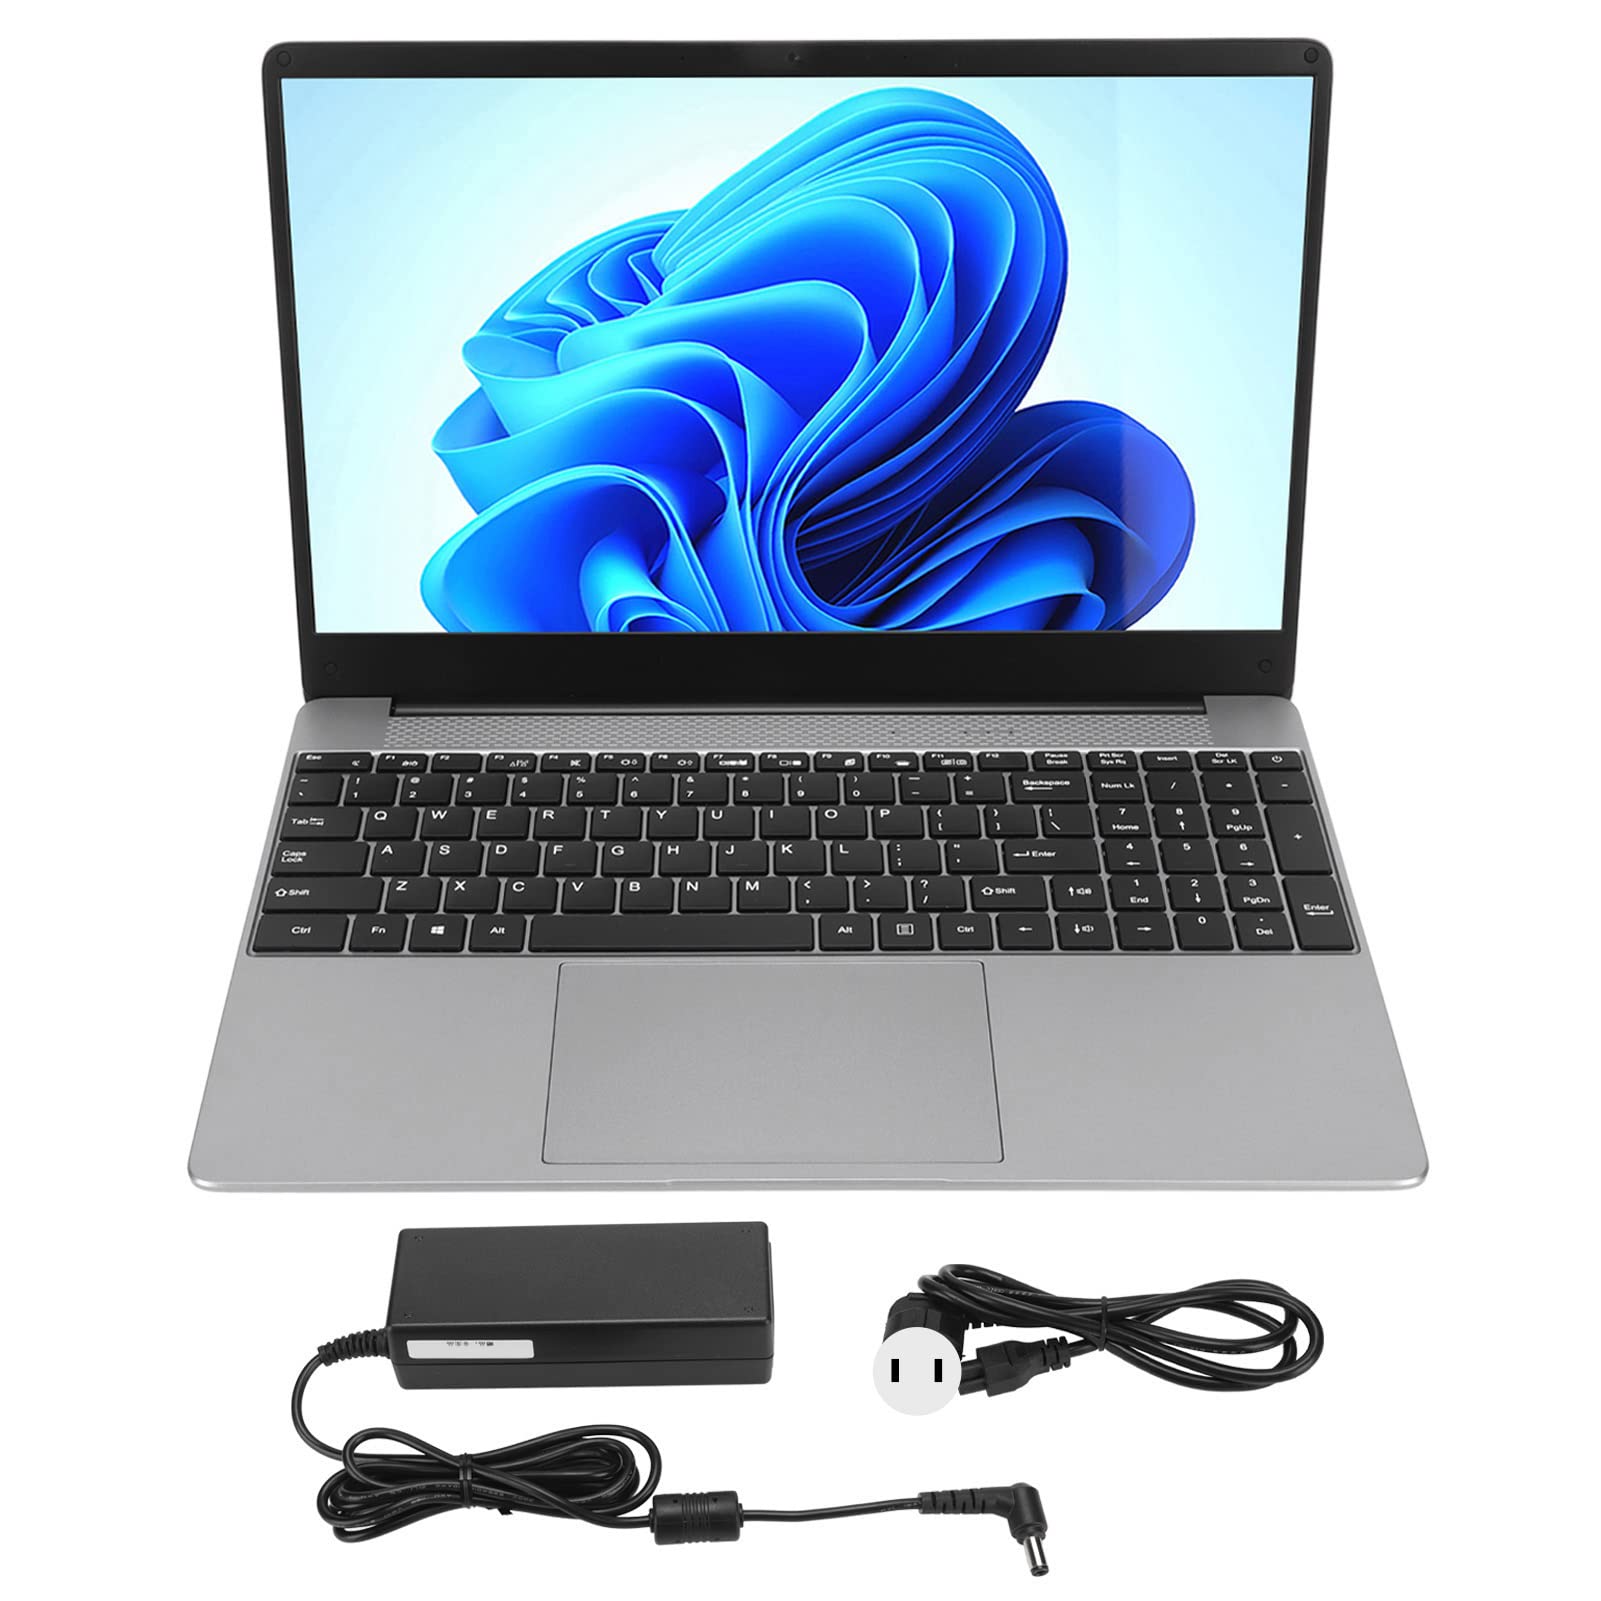 Pomya 2 in 1 Laptop Computer Windows10, 15.6inch Notebook 16G RAM 512G ROM with Backlit Keyboard, 5000mAh Laptop Computer for Intel I7 CPU, for Business, Study and Entertainment